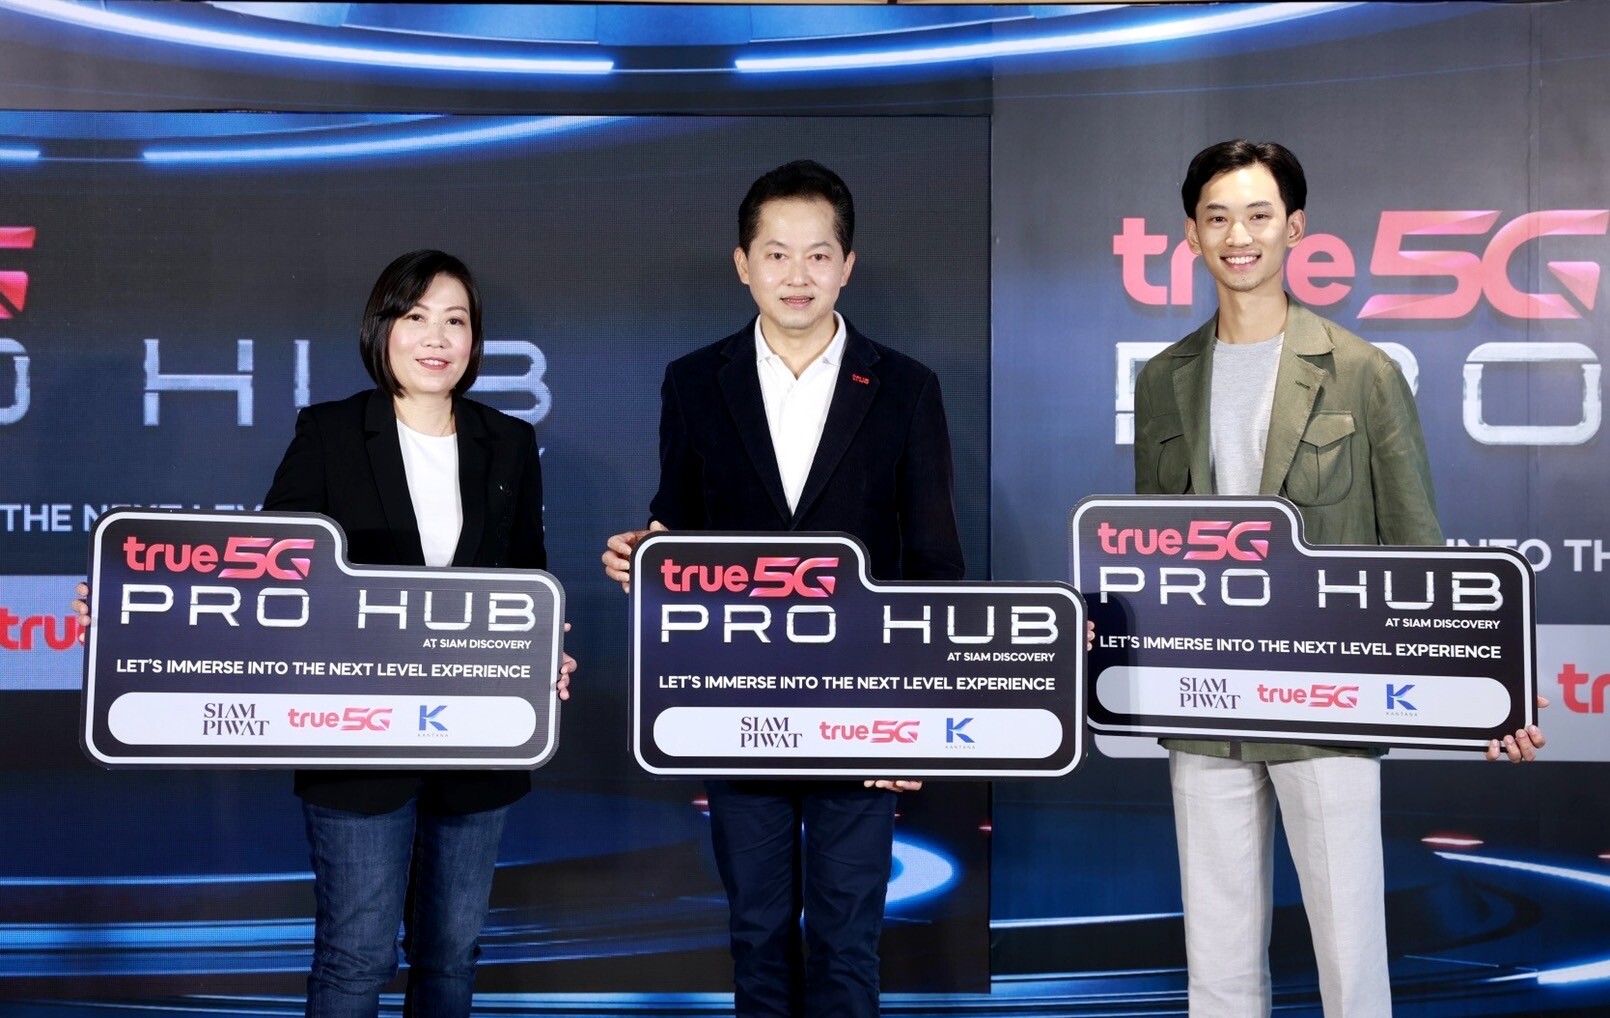 Three giant partners - Siam Piwat, True Group, and Kantana Group spend 300 million baht to launch "True 5G PRO HUB